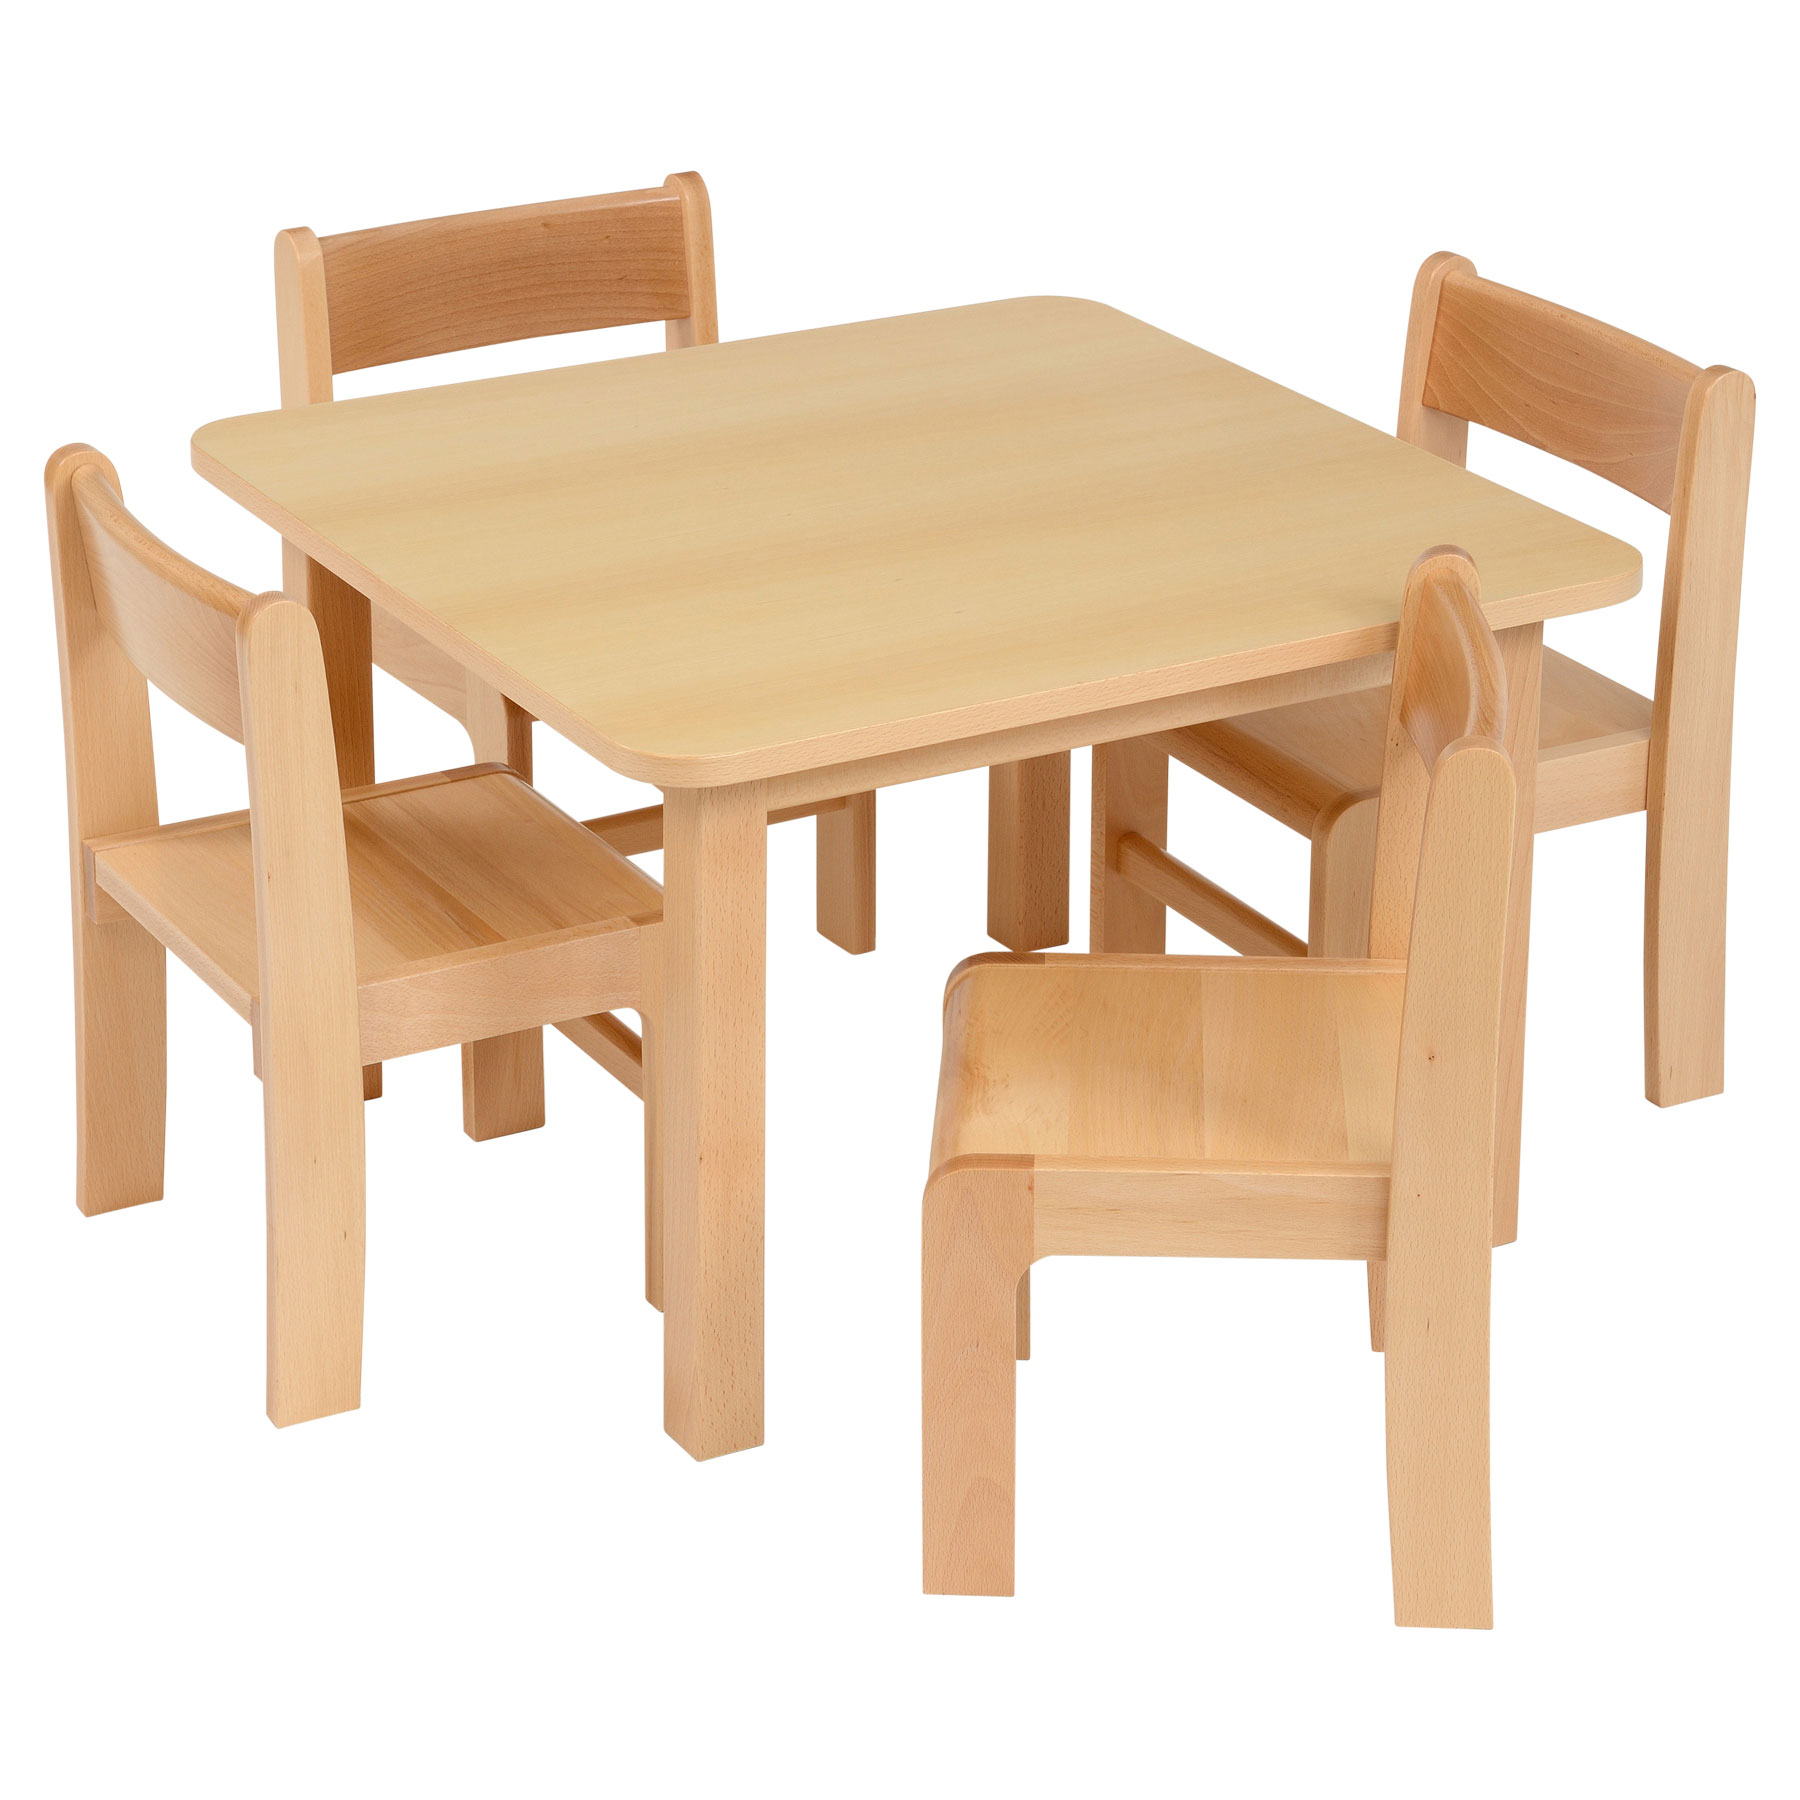 Children's Chair & Table Packages